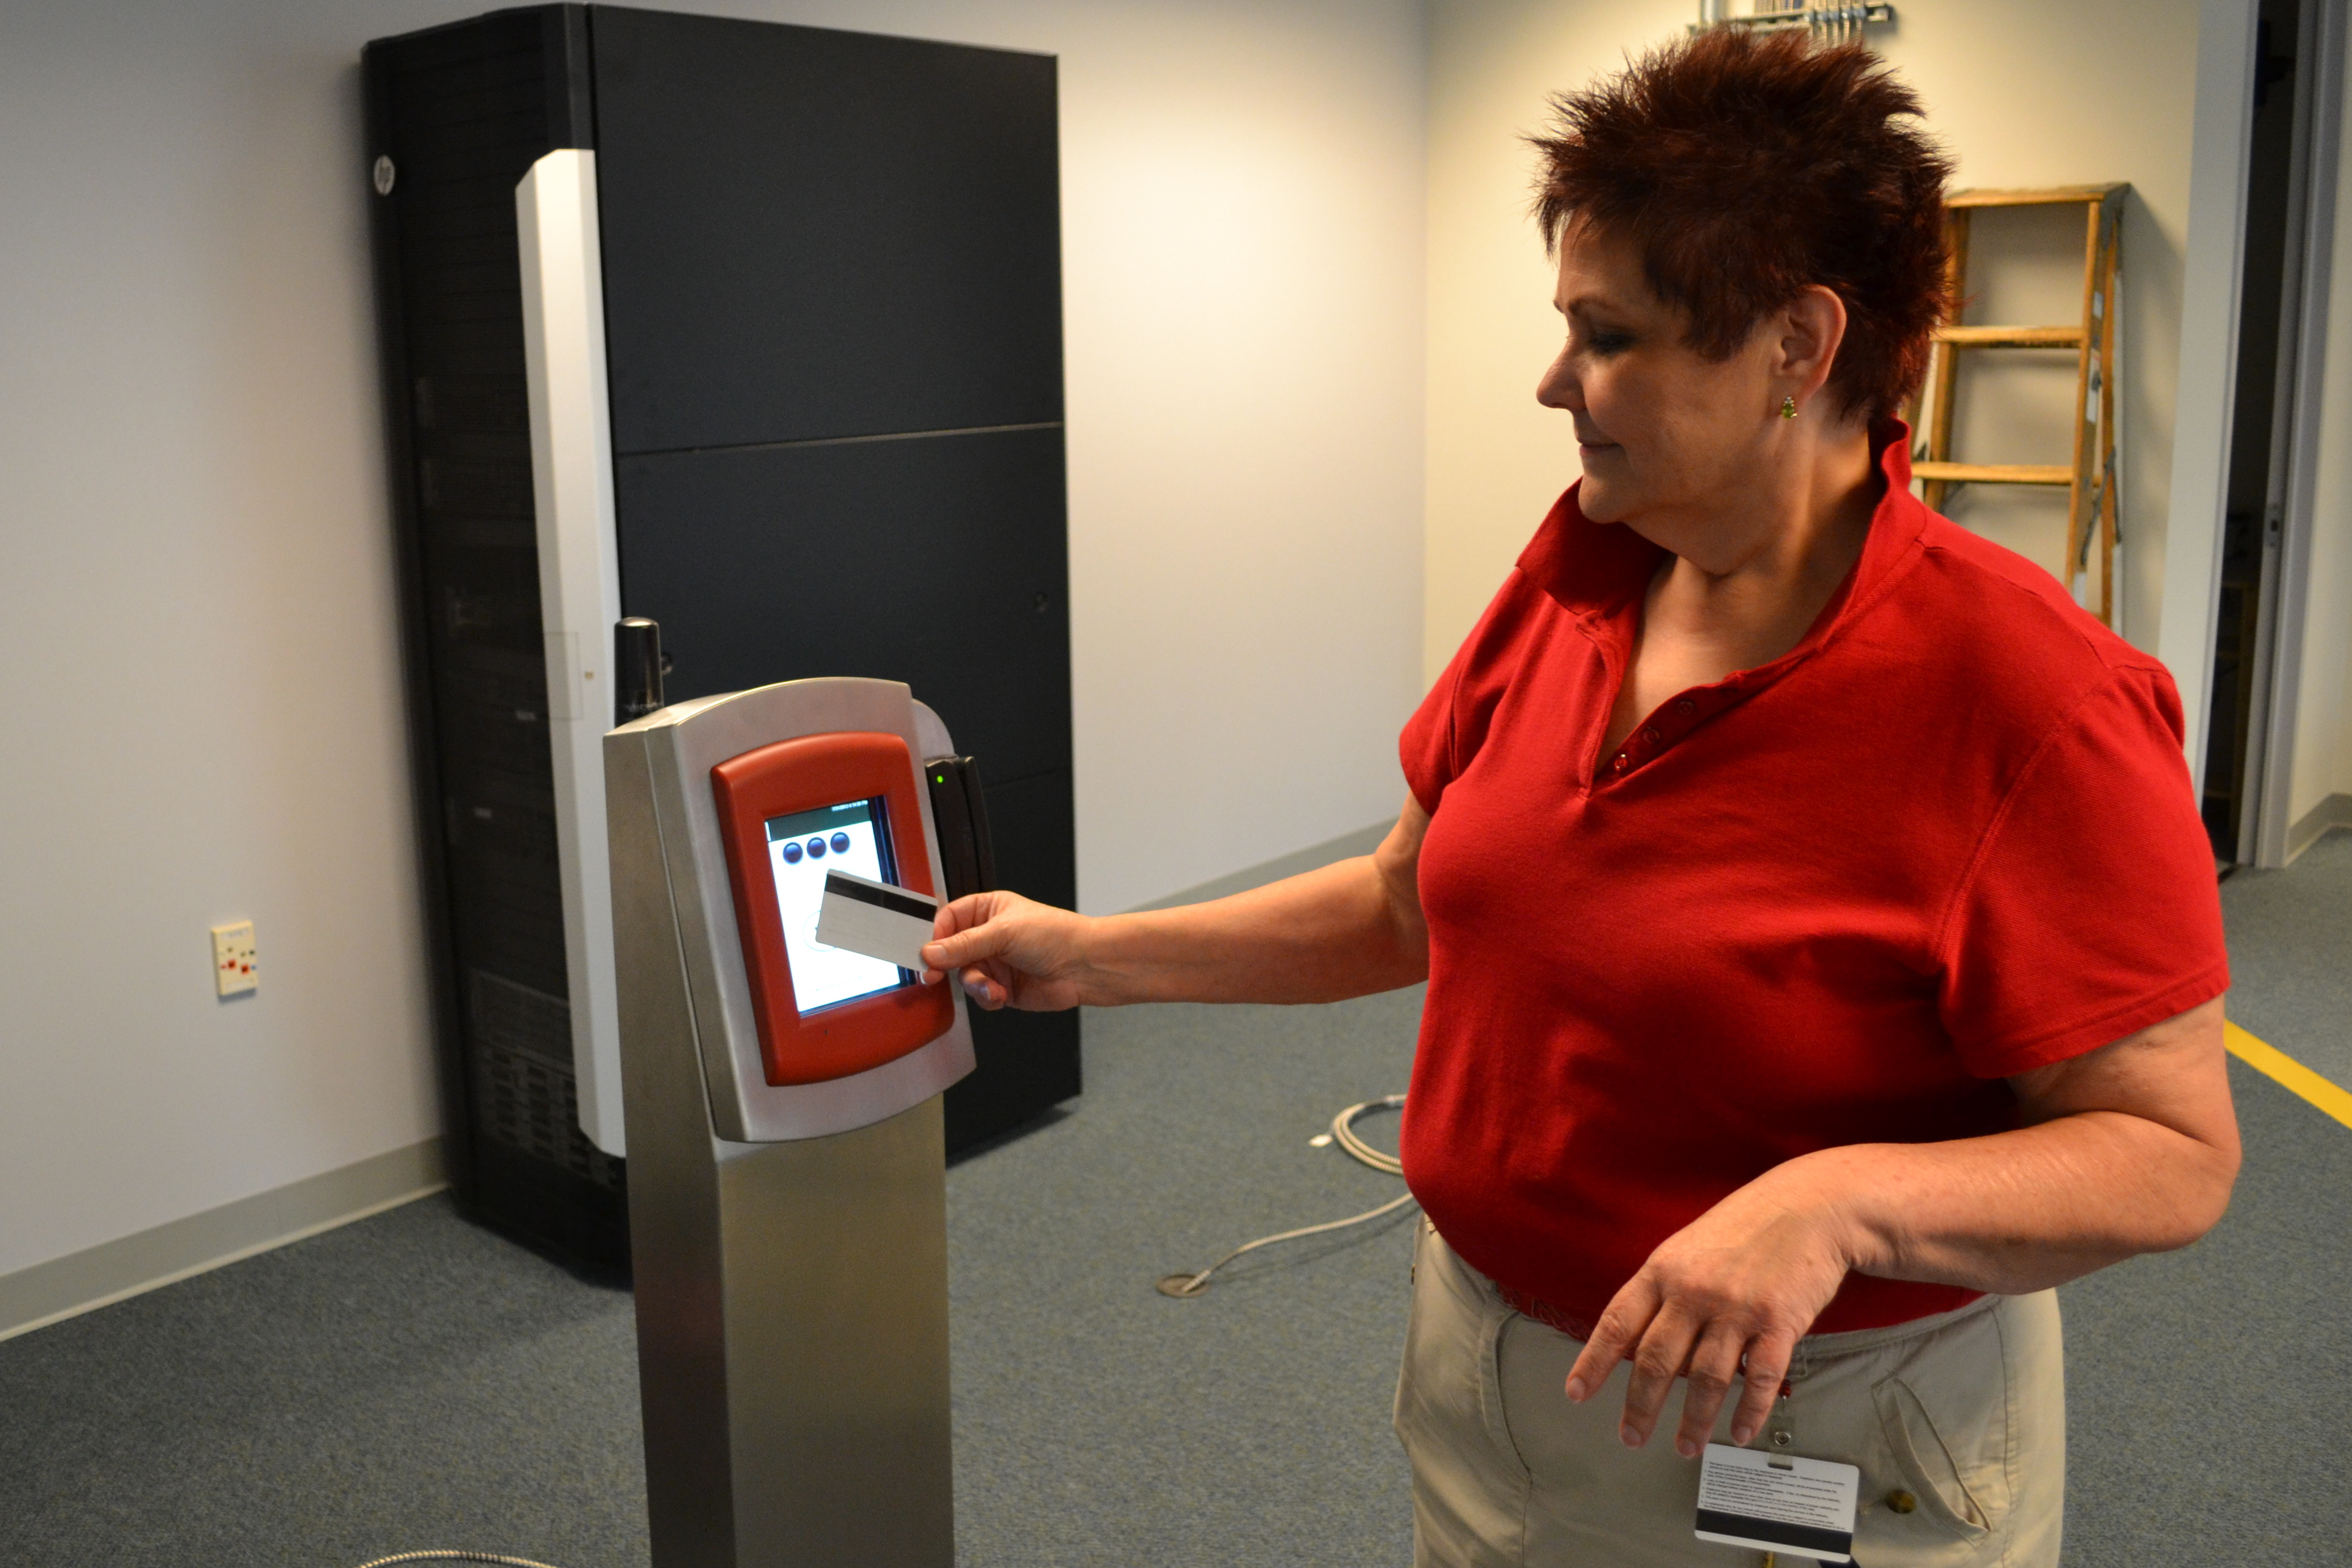 Leslie Hickman, deputy chief officer of NPT Integration, demonstrated how passengers will tap card readers at the outlying regional rail stations